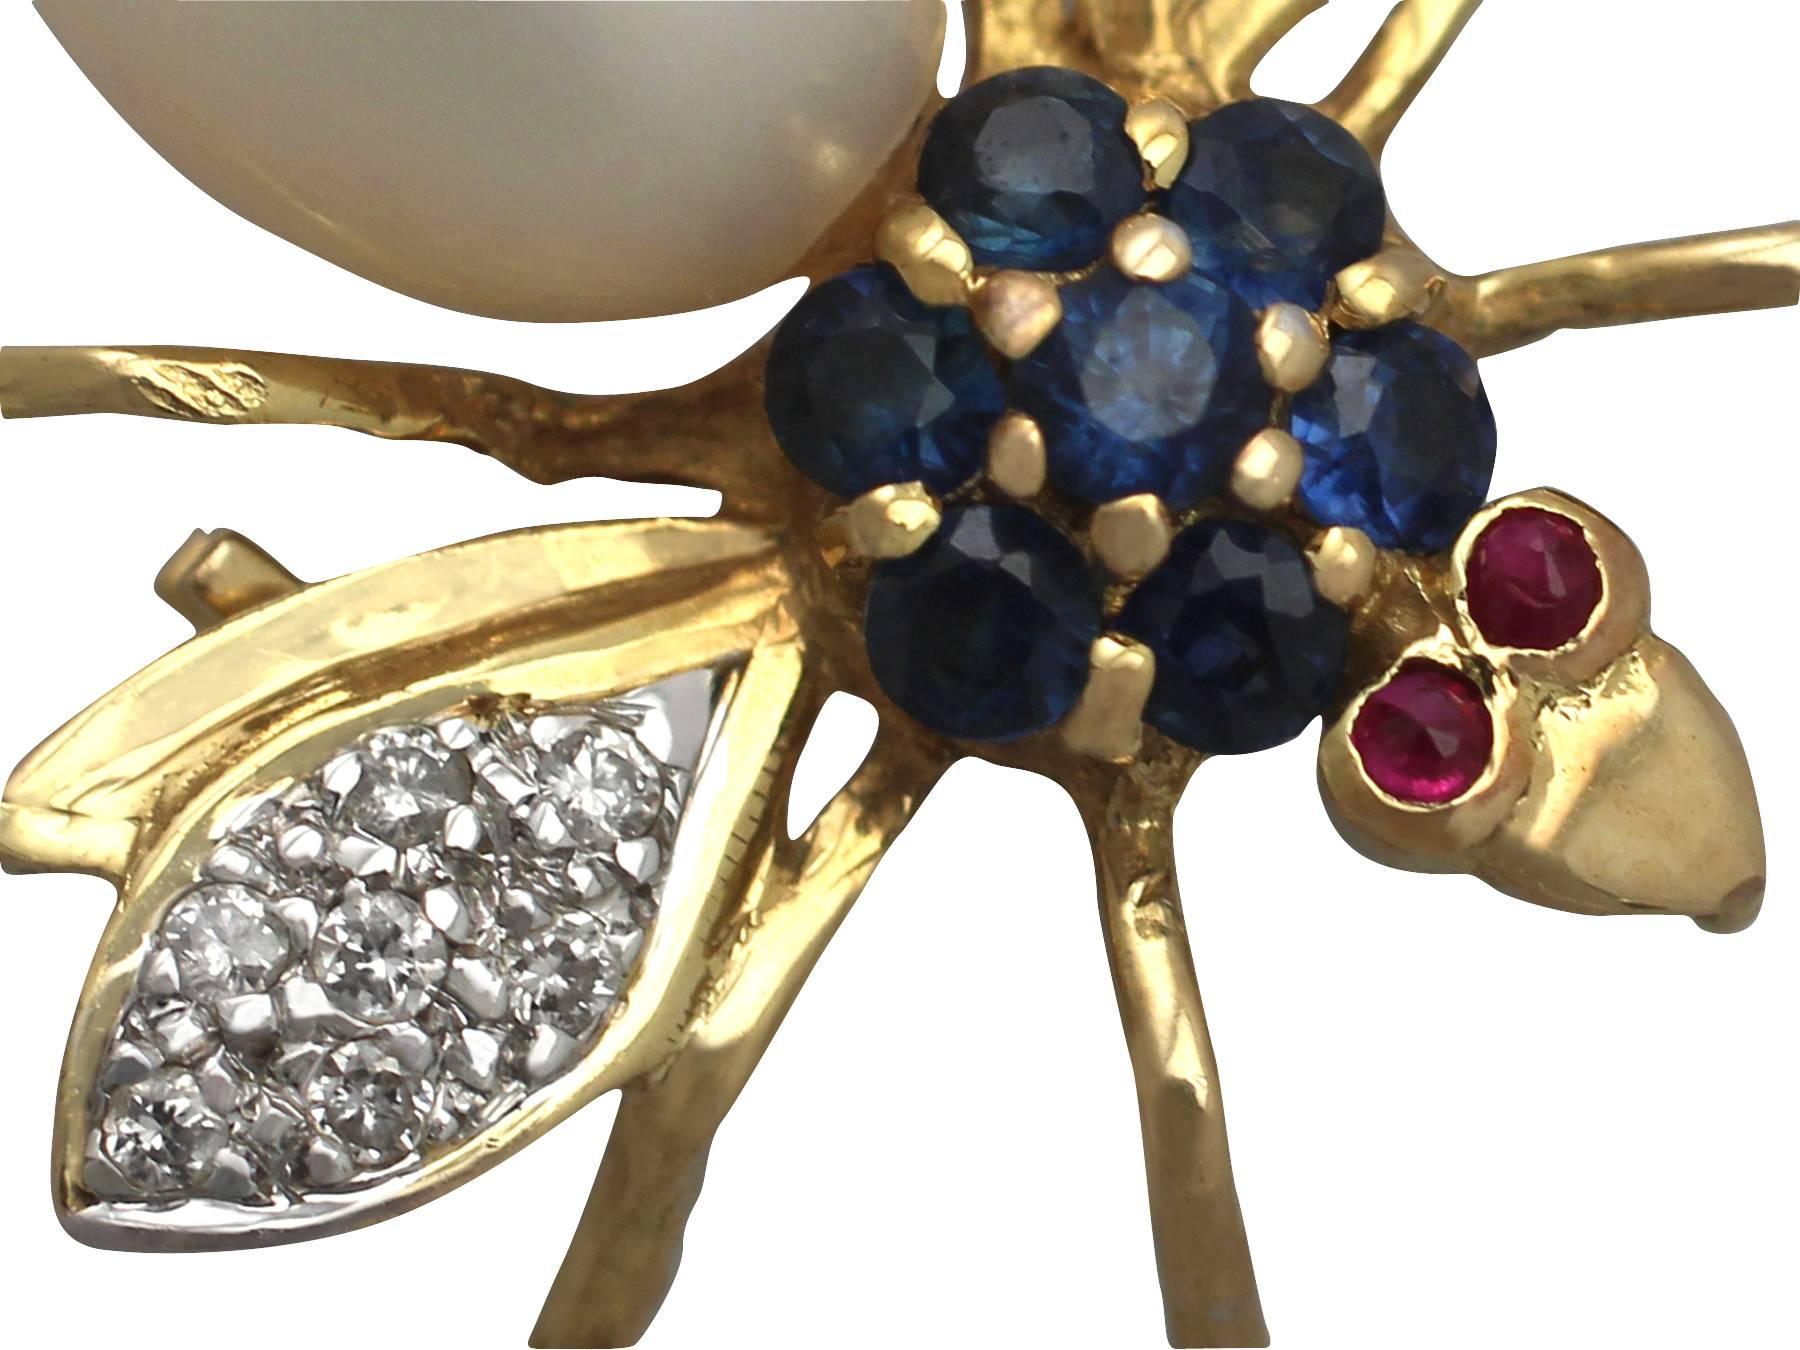 A fine and impressive vintage 0.14 carat diamond, pearl, sapphire and ruby, 18 karat yellow gold and 18 karat white gold set brooch in the form of a winged insect; part of our vintage jewelry and estate jewelry collections

This fine and